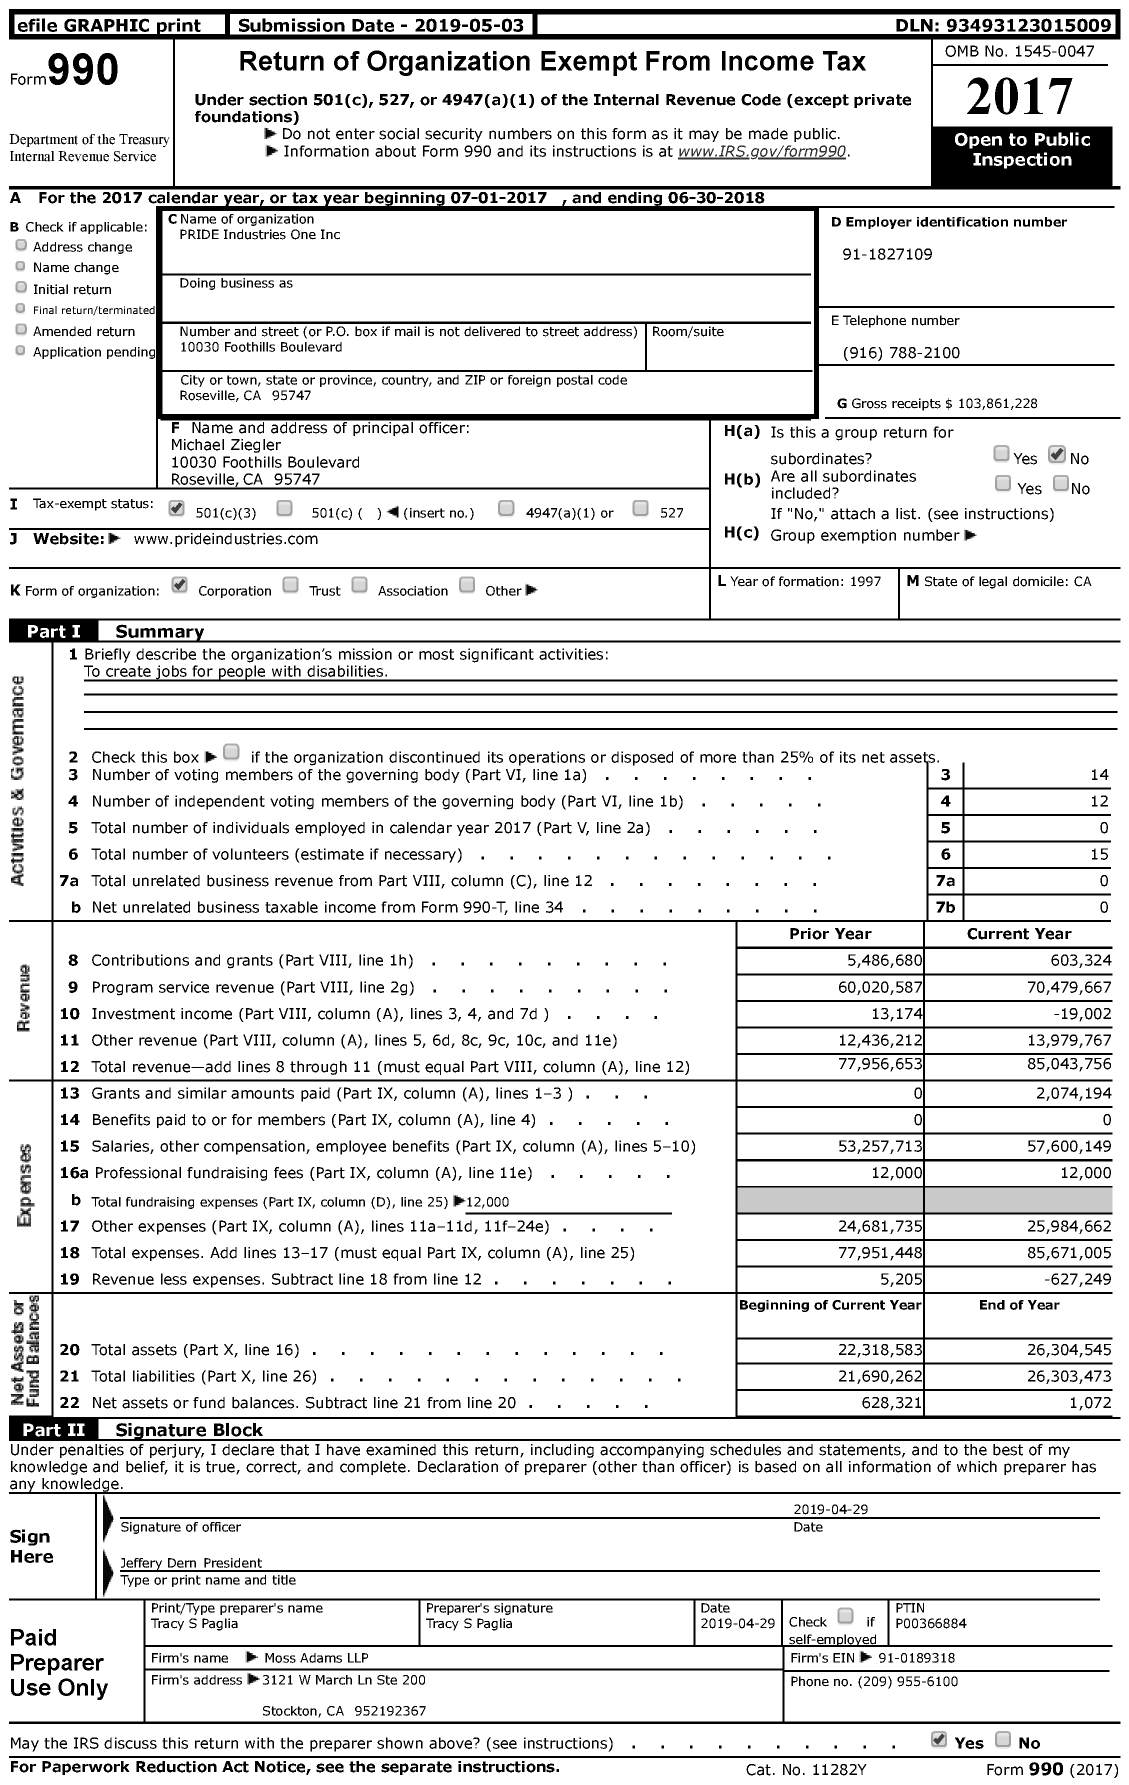 Image of first page of 2017 Form 990 for PRIDE Industries One